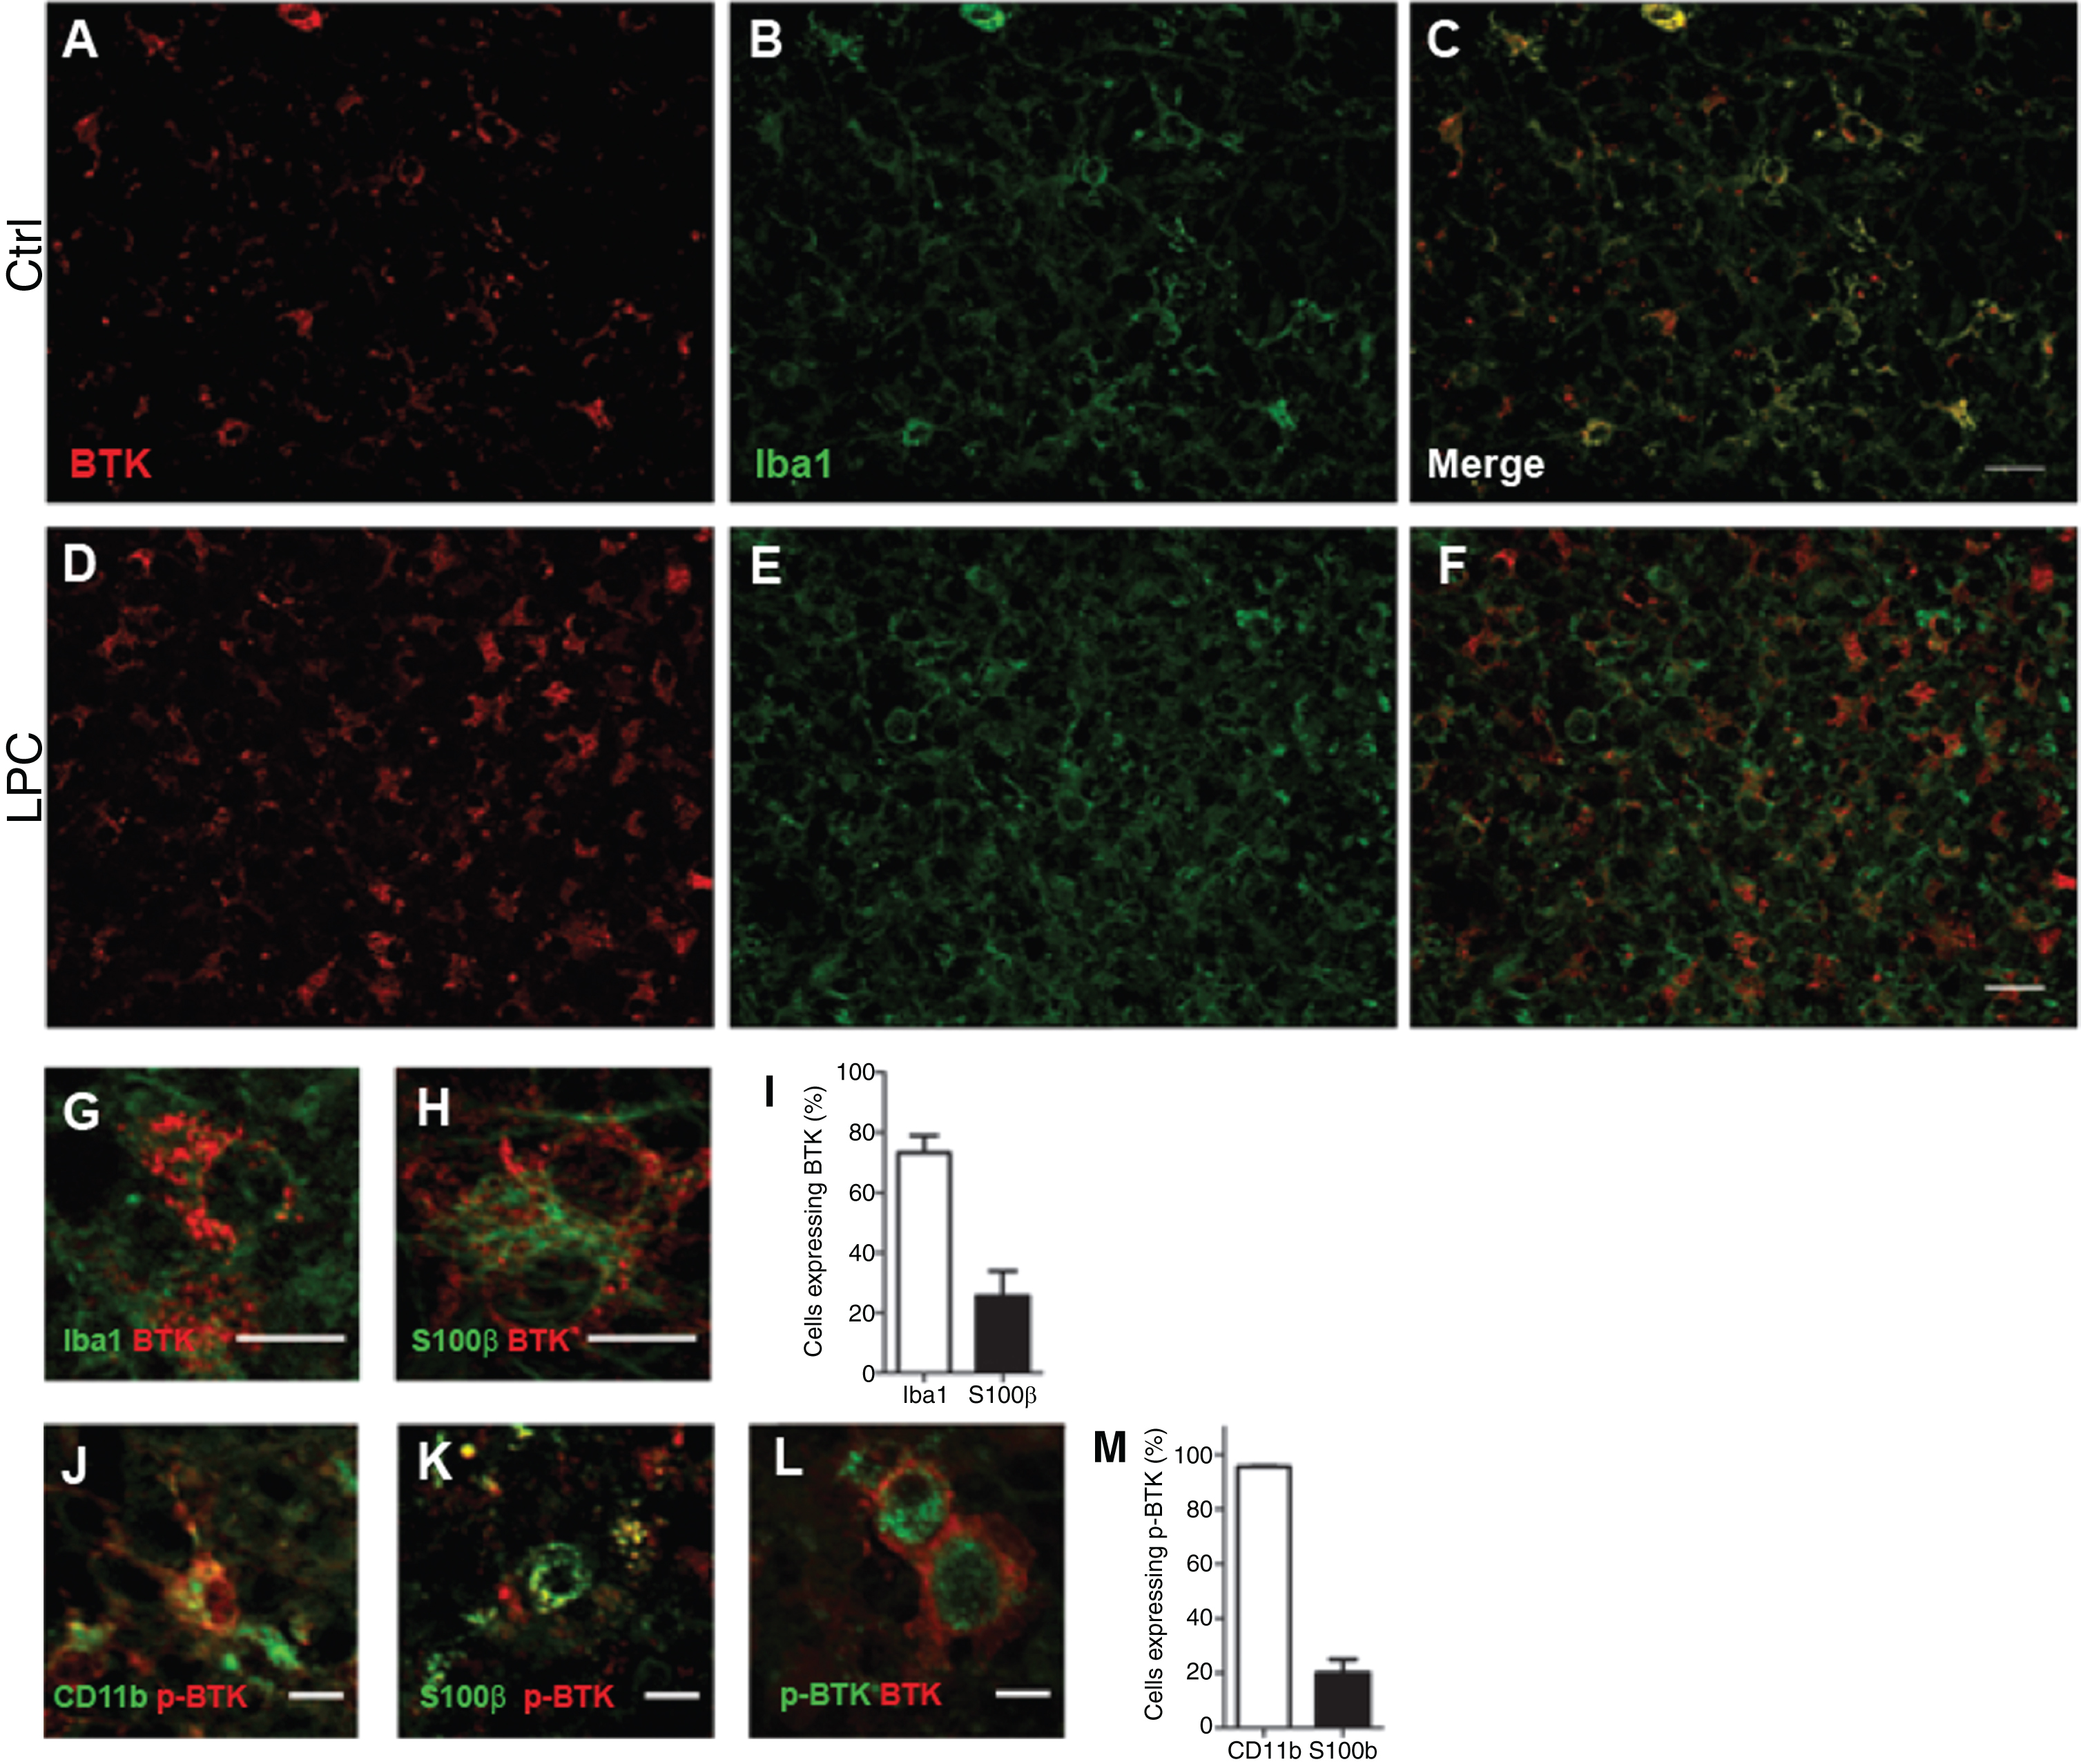 Detection of BTK in microglia and astrocytes. Cerebellar organotypic slices from P9 mouse, were maintained in culture and submitted to LPC treatment at DIV6 for 16–17 h. At DIV9 (i.e., peak of demyelination) immuno staining was performed for BTK (Red) and Iba1 (microglia, green). A–F: Small magnification of control (A–C), and after LPC-induced demyelination (D–F). G,H,J, and K: Higher magnification illustrating co-localisation of BTK and p-BTK in microglia labeled with Iba1 (G) or CD11-F4/80-CD68 (J) and astrocyte S100ß+ (H, K).L: An example of two cells co-expressing BTK and p-BTK. Note that BTK is more at the surface while p-BTK is more intracytoplasmic. I and M: Quantification of microglia and astrocytes expressing BTK (I) or p-BTK (M). Scale bars: A–F = 20 μm; G,H, J,K, and L = 10 μm.